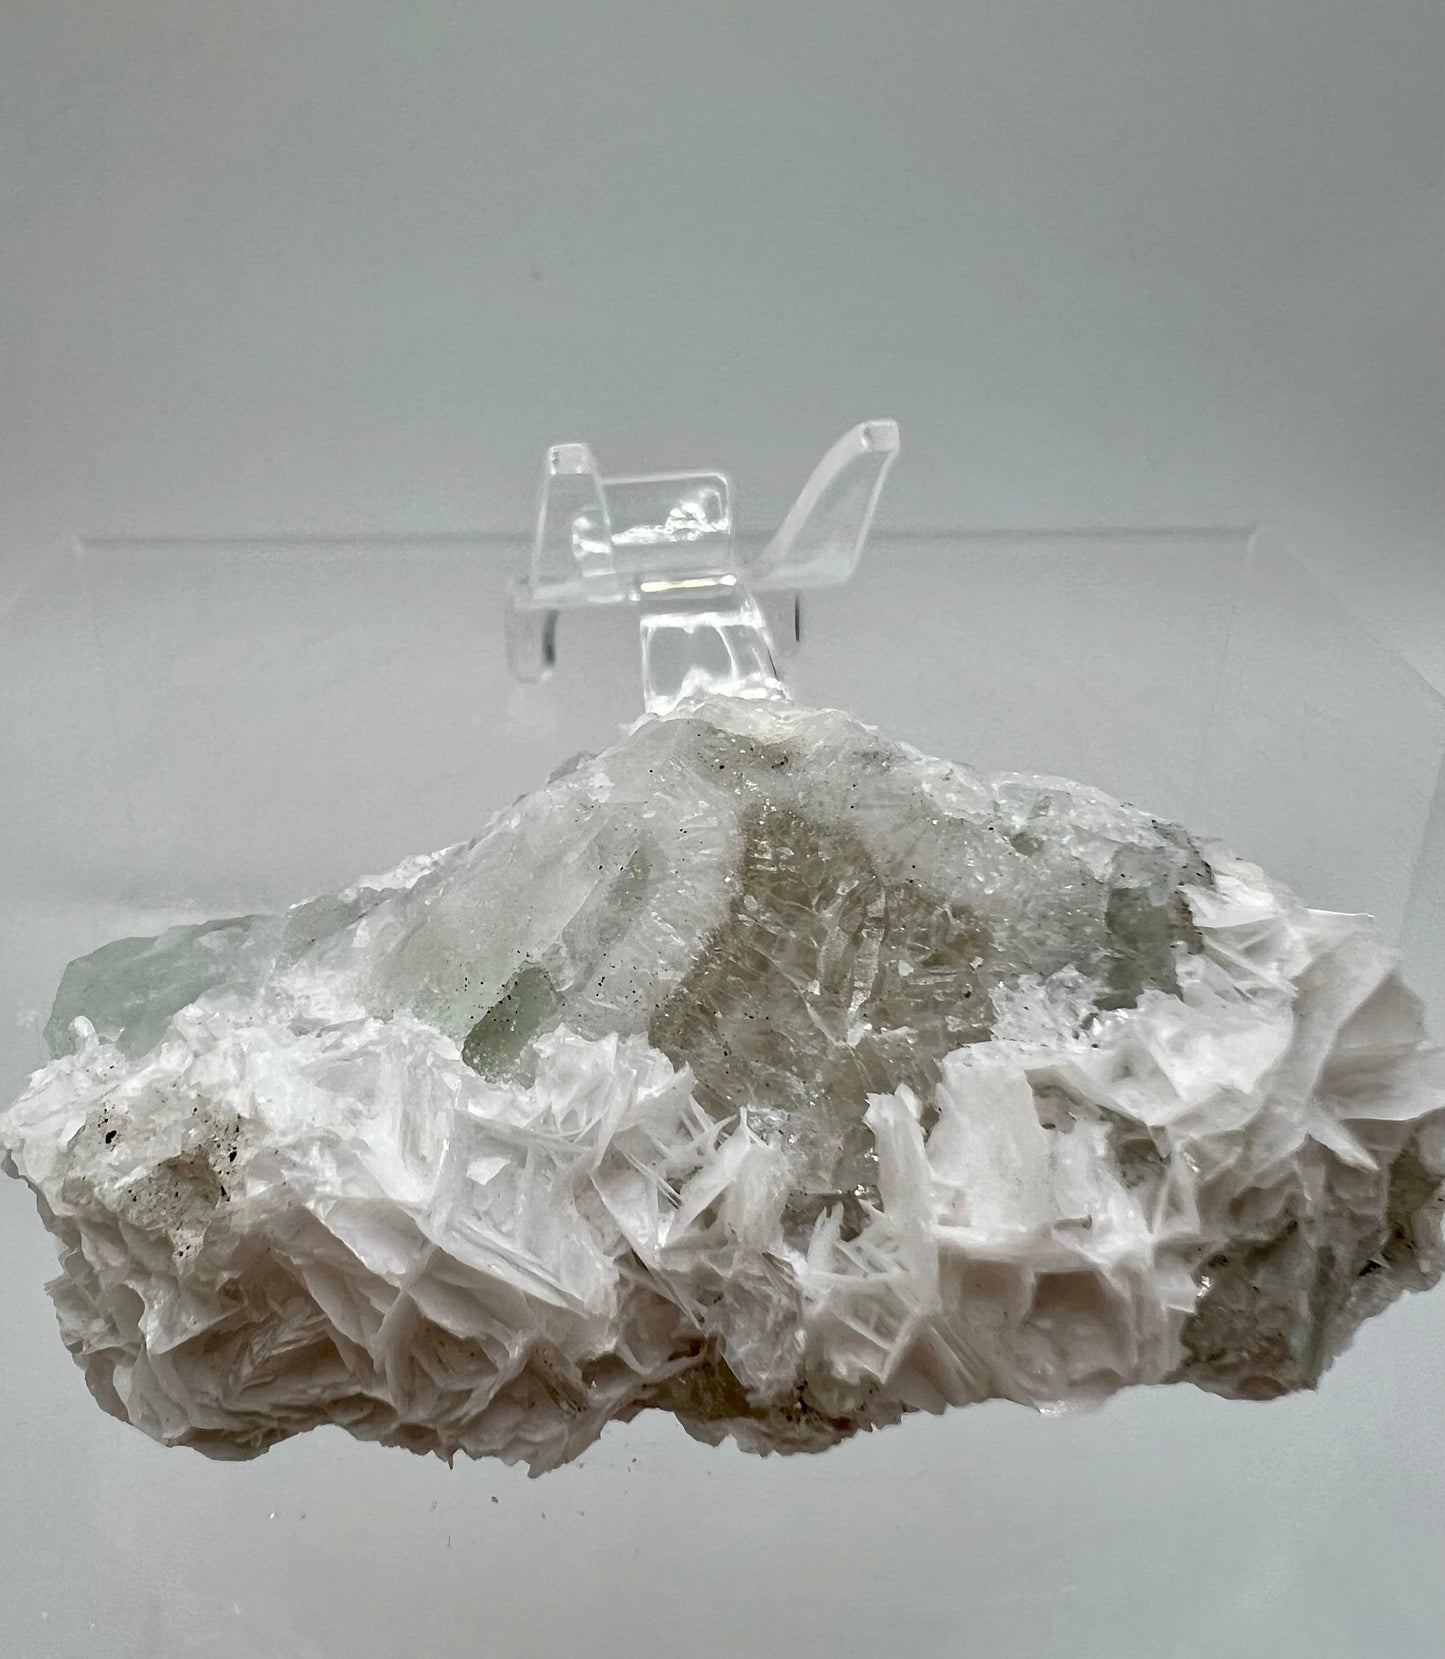 Gorgeous White Rose Calcite On Fluorite Matrix. Crazy Intense UV Reaction. Angel Wing Bladed Calcite Cluster.